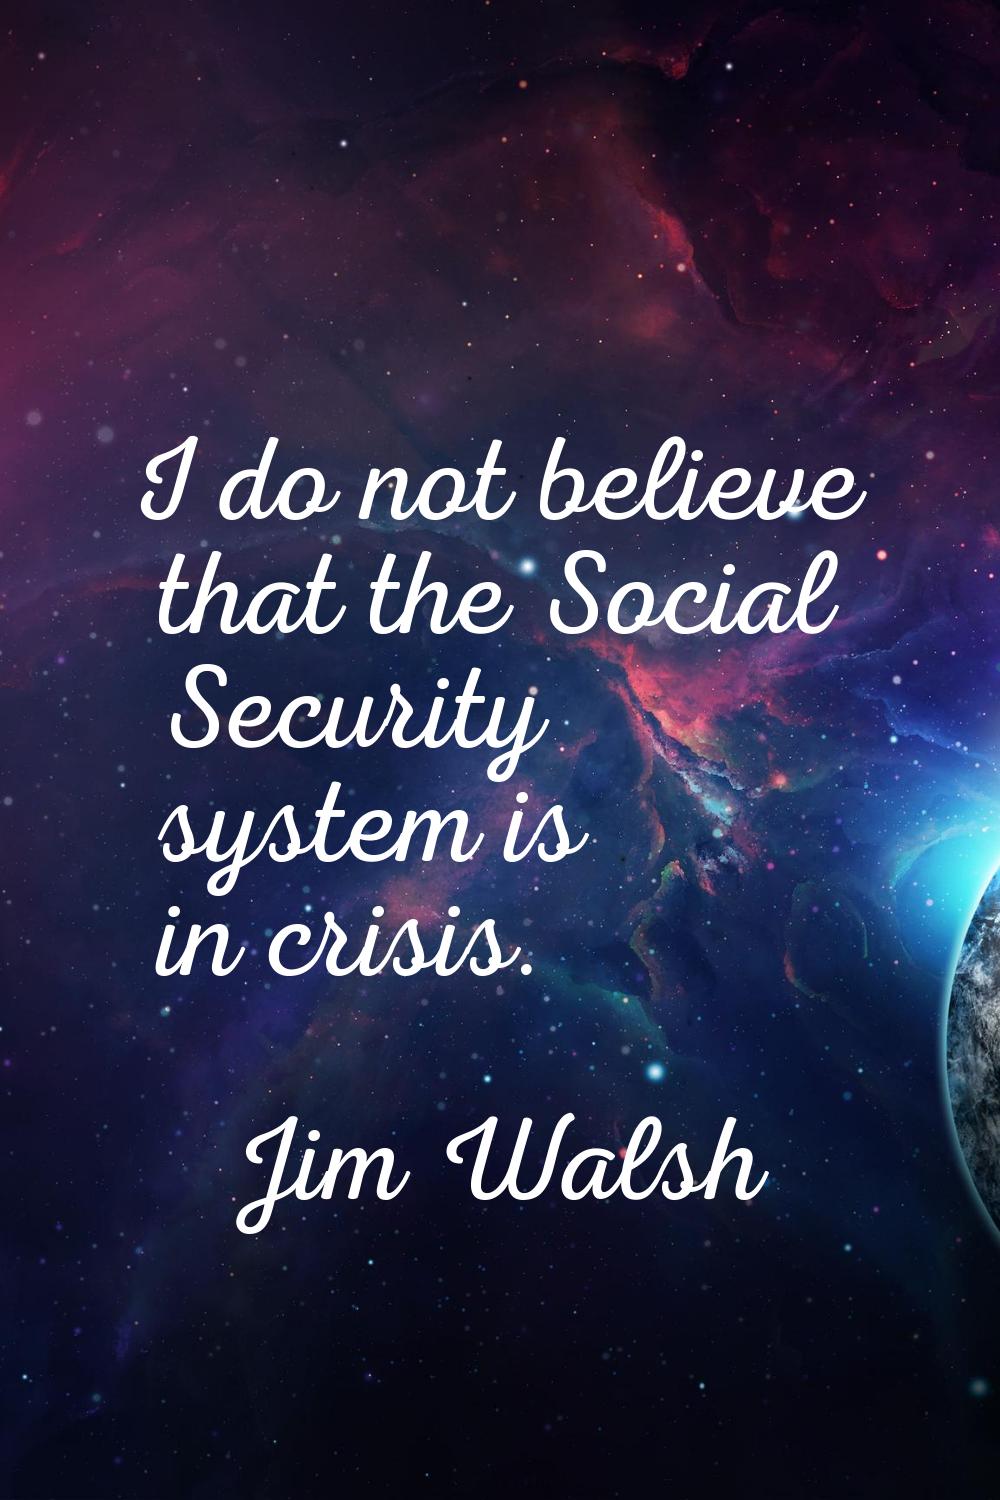 I do not believe that the Social Security system is in crisis.